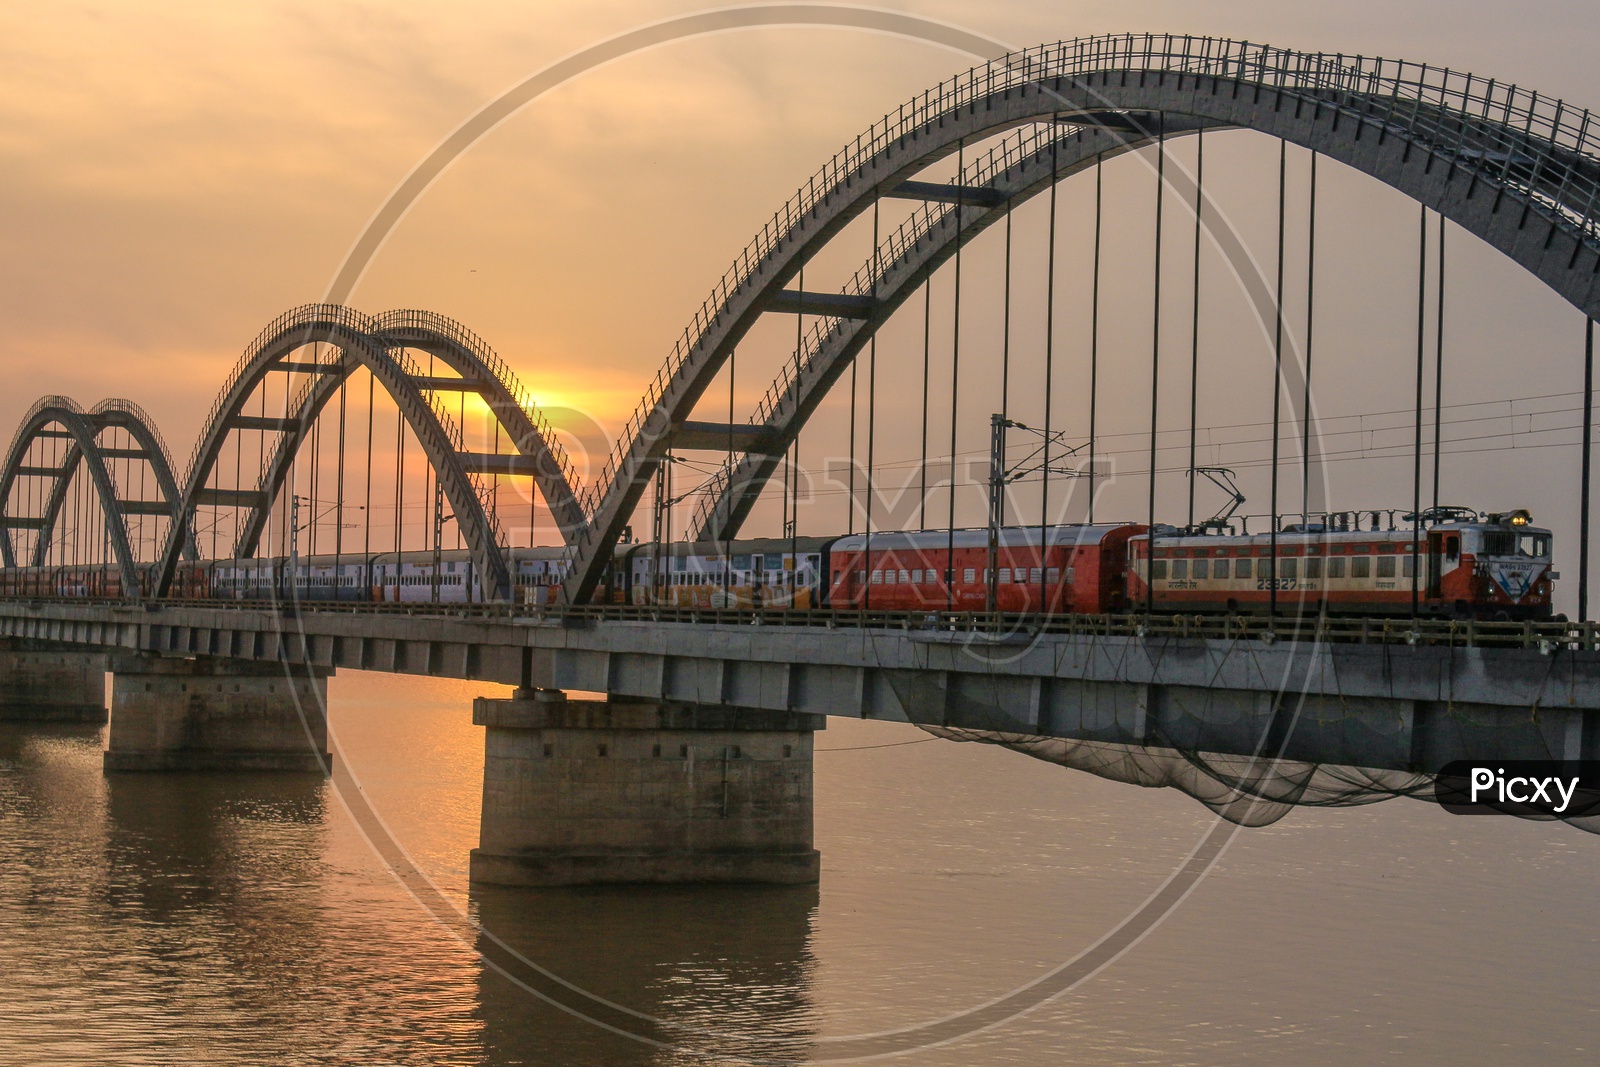 Rajahmundry Arch Bridge With Train On It with Sunset Sky In Background